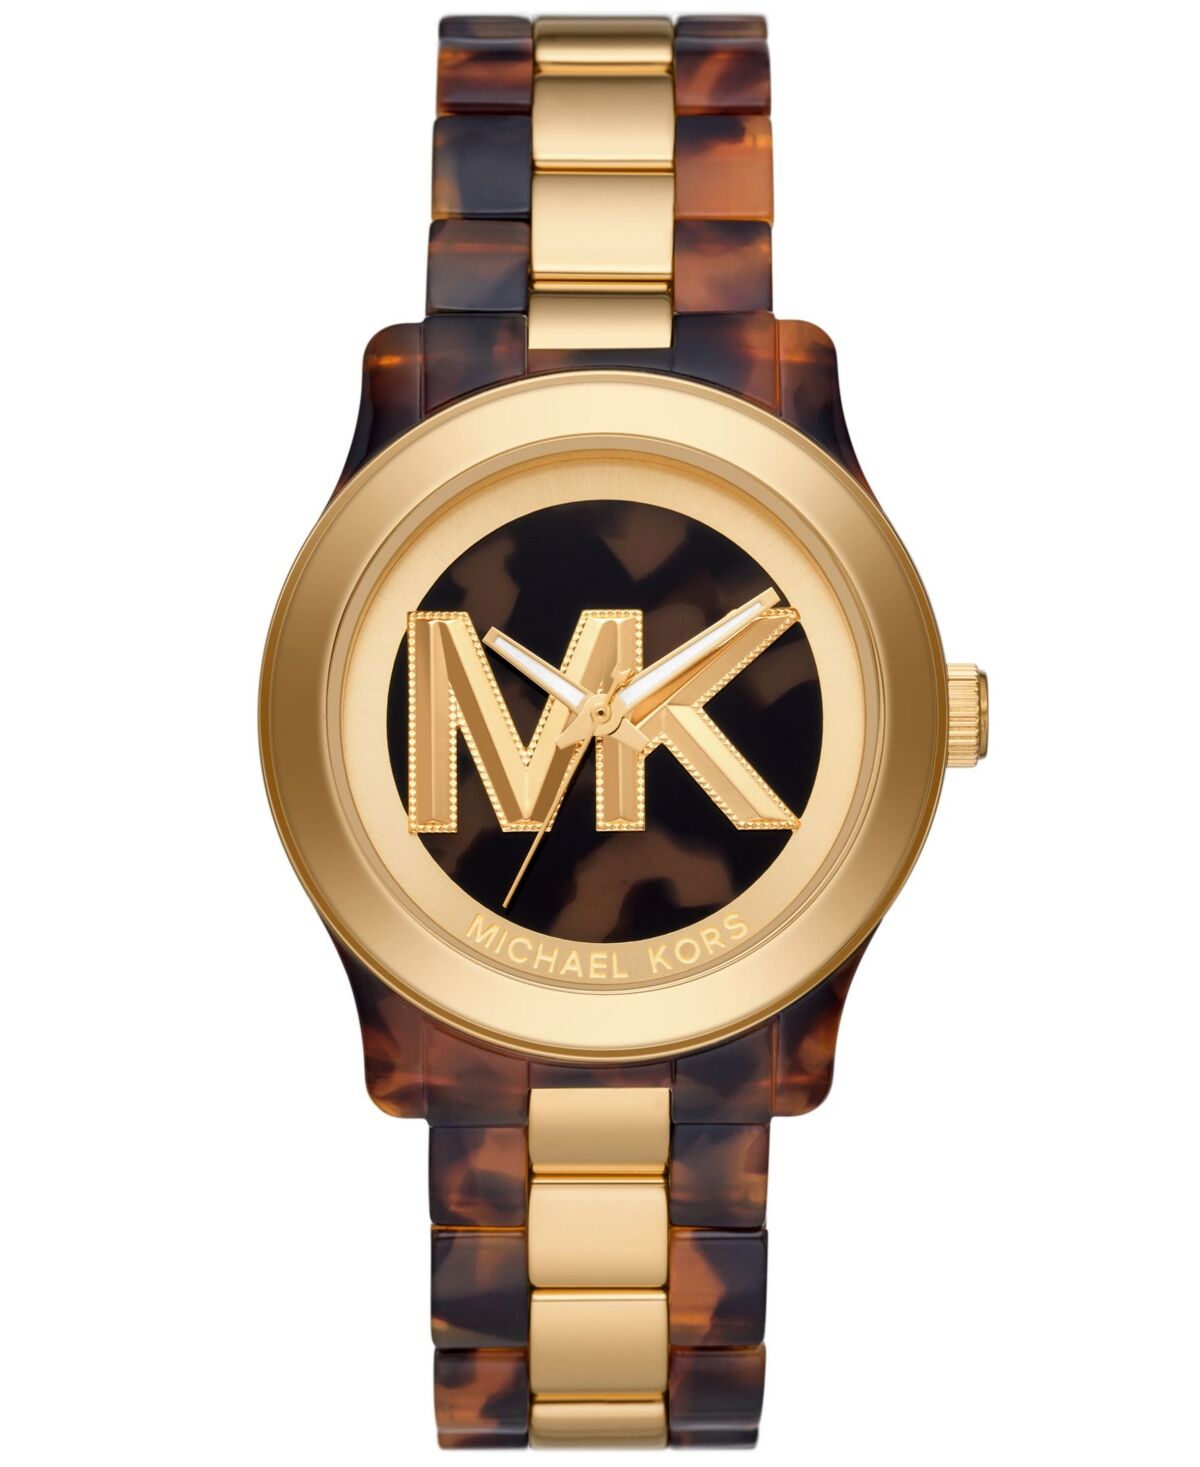 Michael Kors Women's Runway Quartz Three-Hand Brown Acetate and Gold-Tone Stainless Steel Watch 38mm - Two-Tone